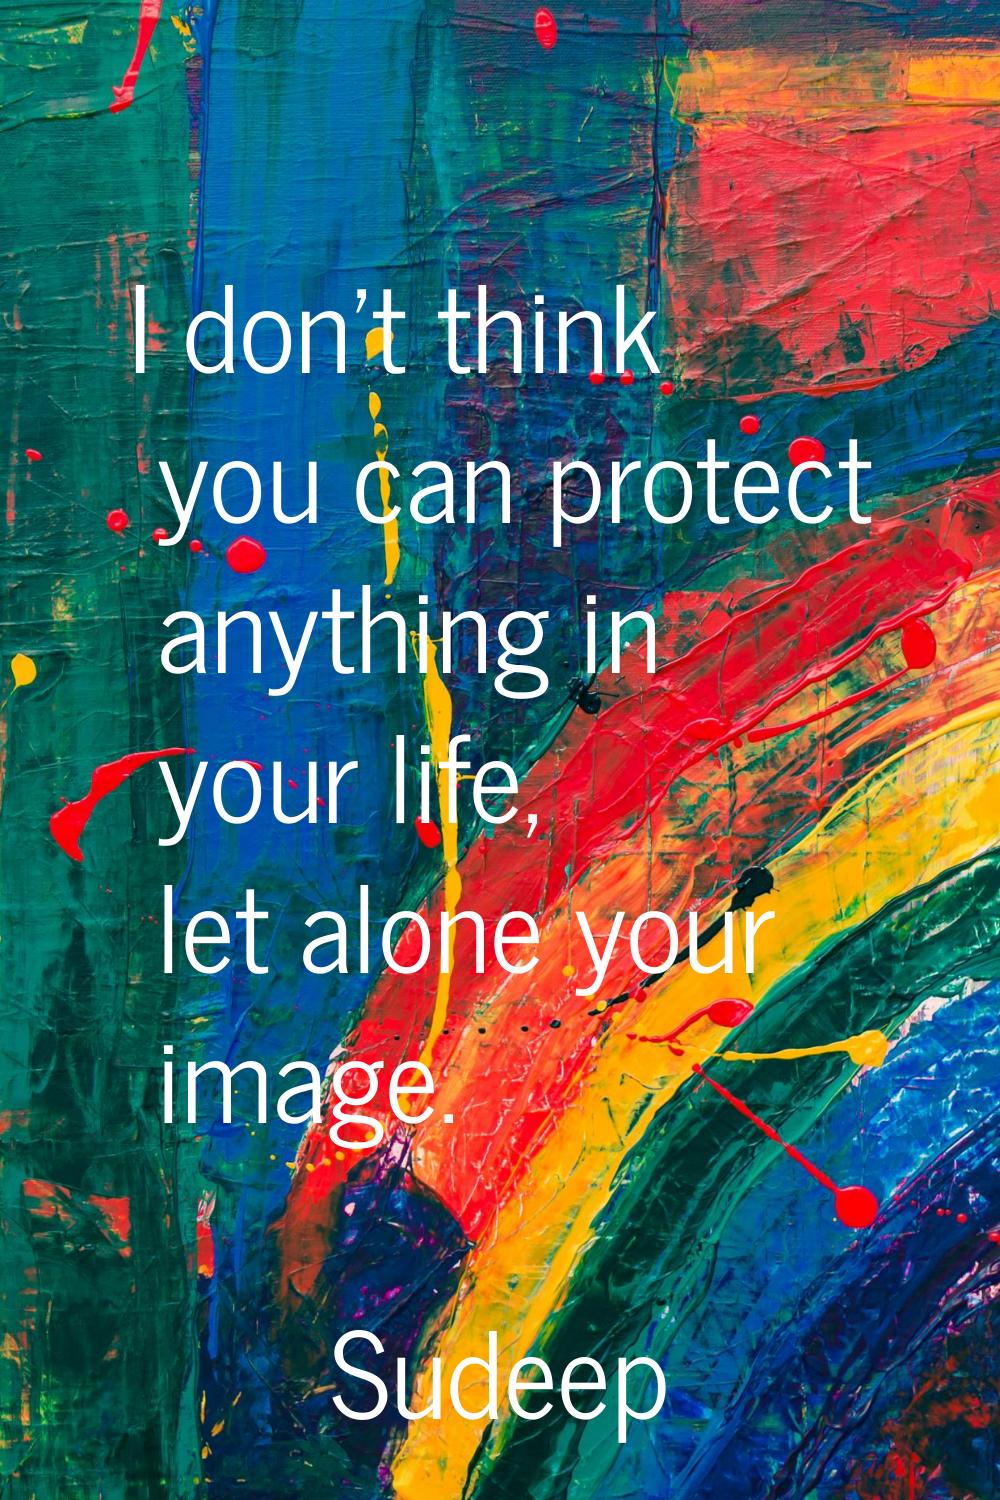 I don't think you can protect anything in your life, let alone your image.